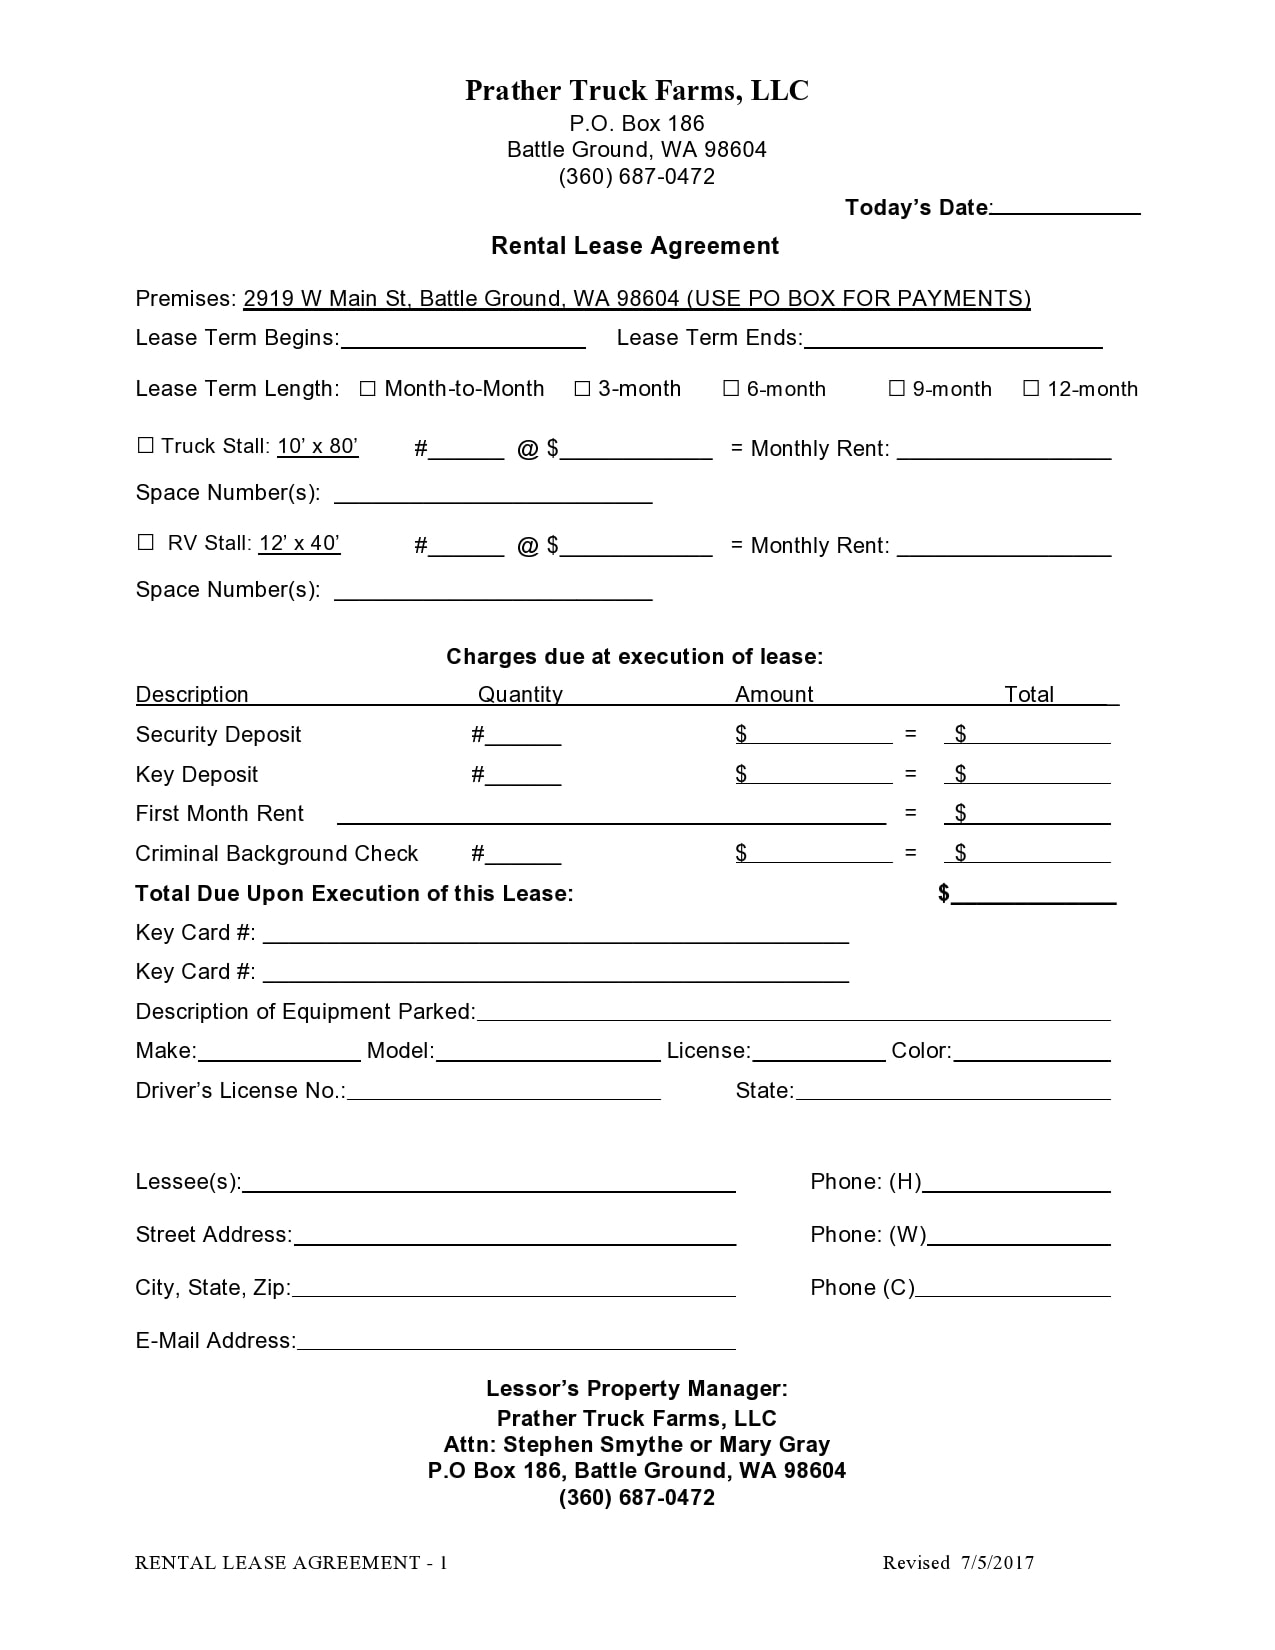 Lease Agreement Form For Trucking Companies Printable Form, Templates